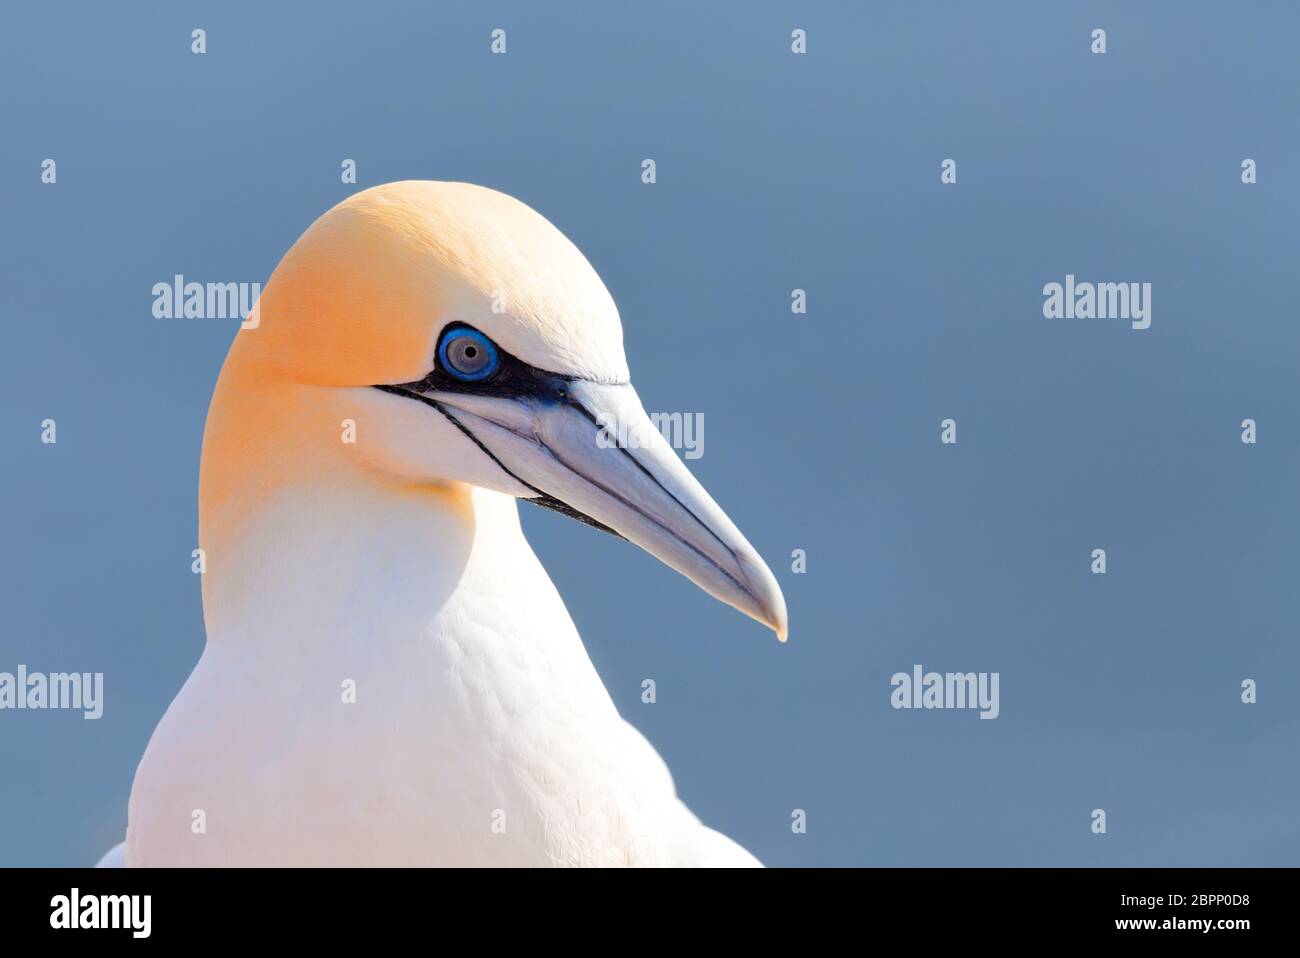 Northern gannet, Sula bassana, detail head portrait of beautiful sea bird, sitting on the rock with blue sea water in the background, Helgoland island Stock Photo